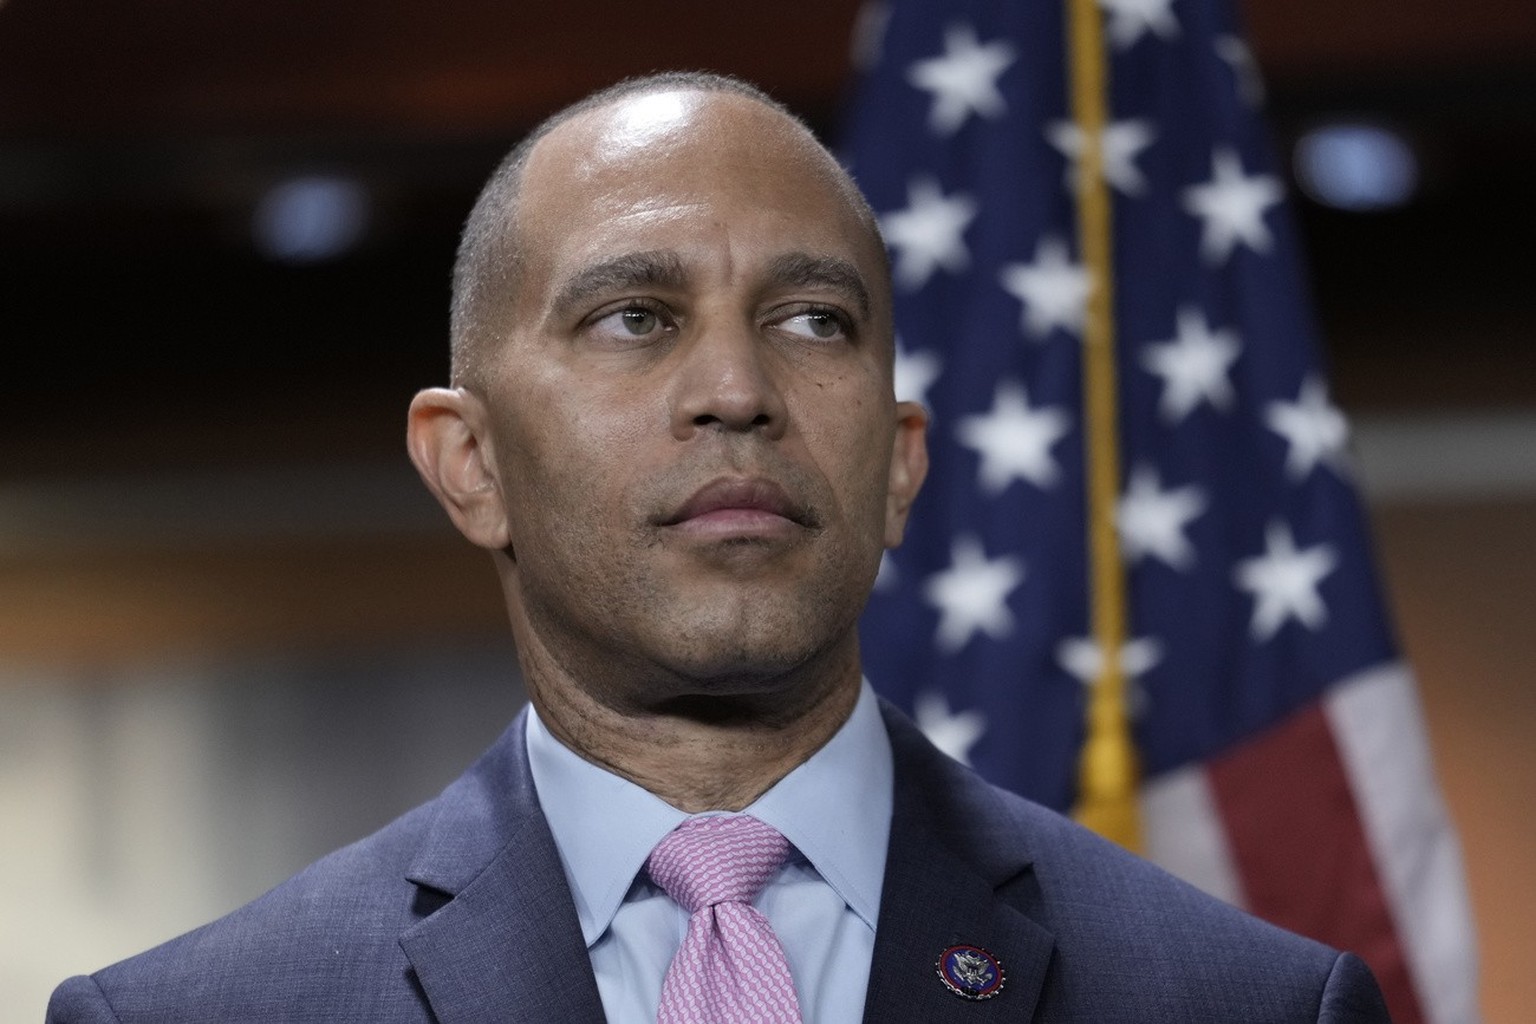 Rep. Hakeem Jeffries, D-N.Y., speaks to reporters just after he was elected by House Democrats to be the new leader when Speaker of the House Nancy Pelosi, D-Calif., steps aside in the new Congress un ...